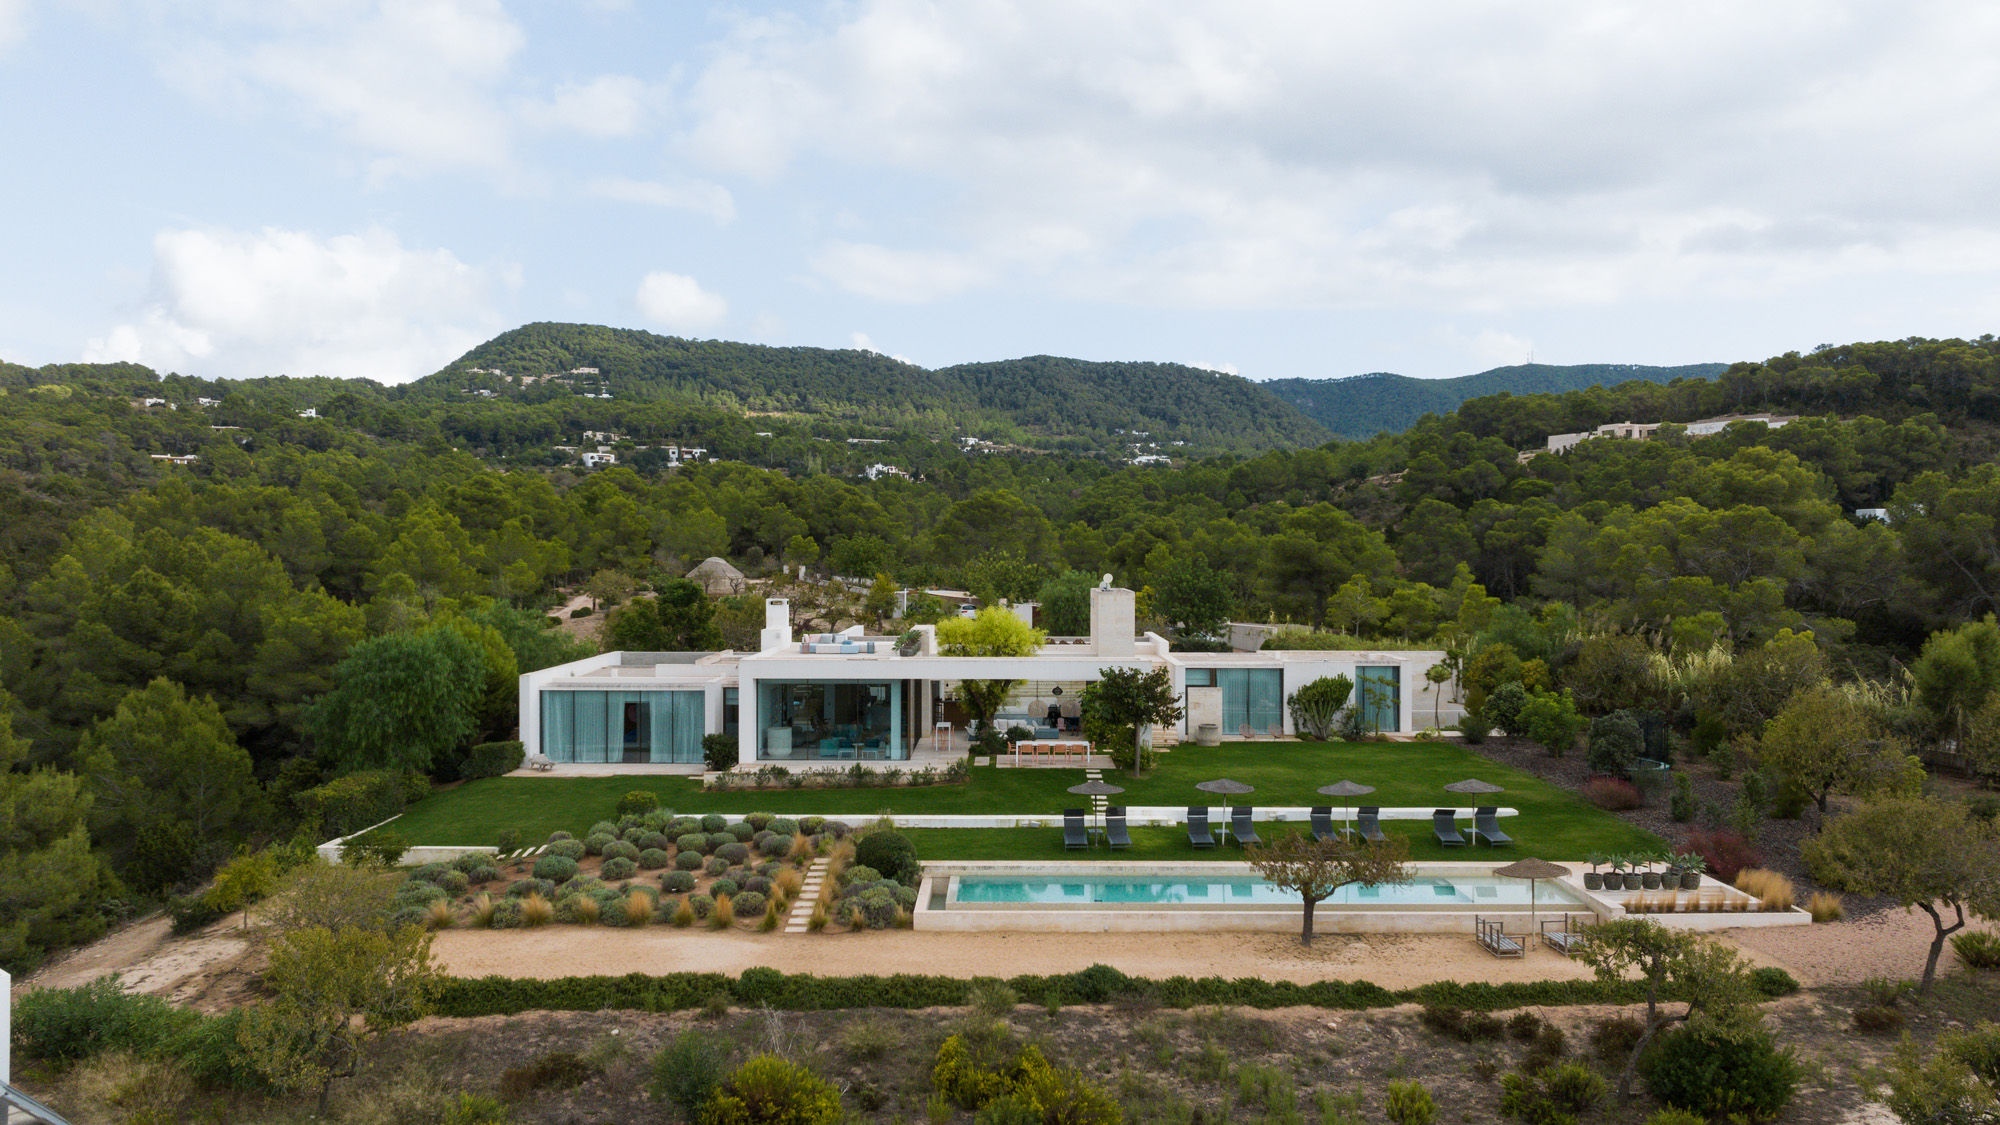 Sprawling plot of a completely private rental villa in Ibiza